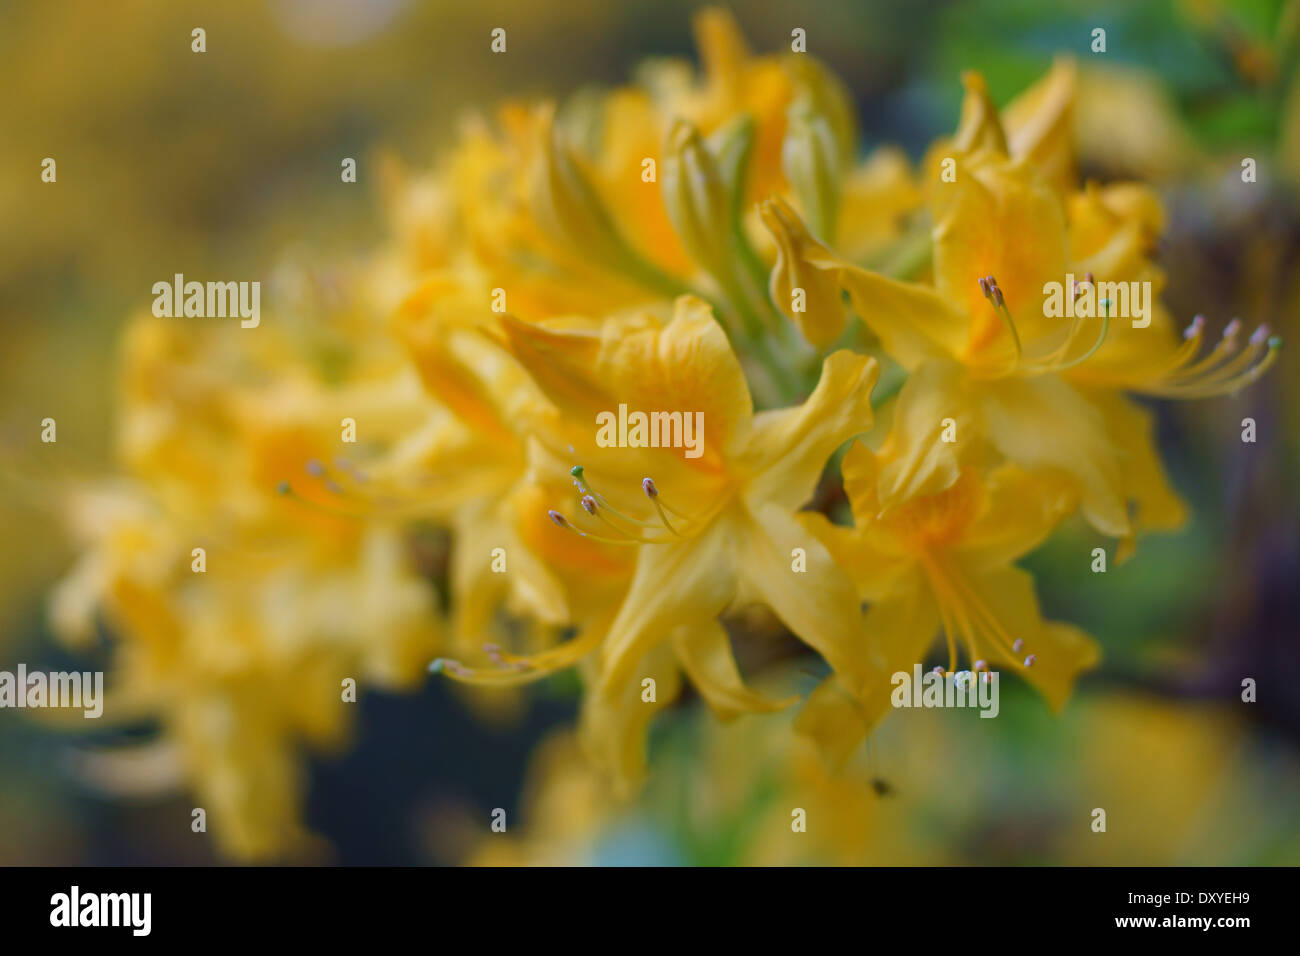 Rich yellow azalea flowers close up Rhododendron luteum Stock Photo